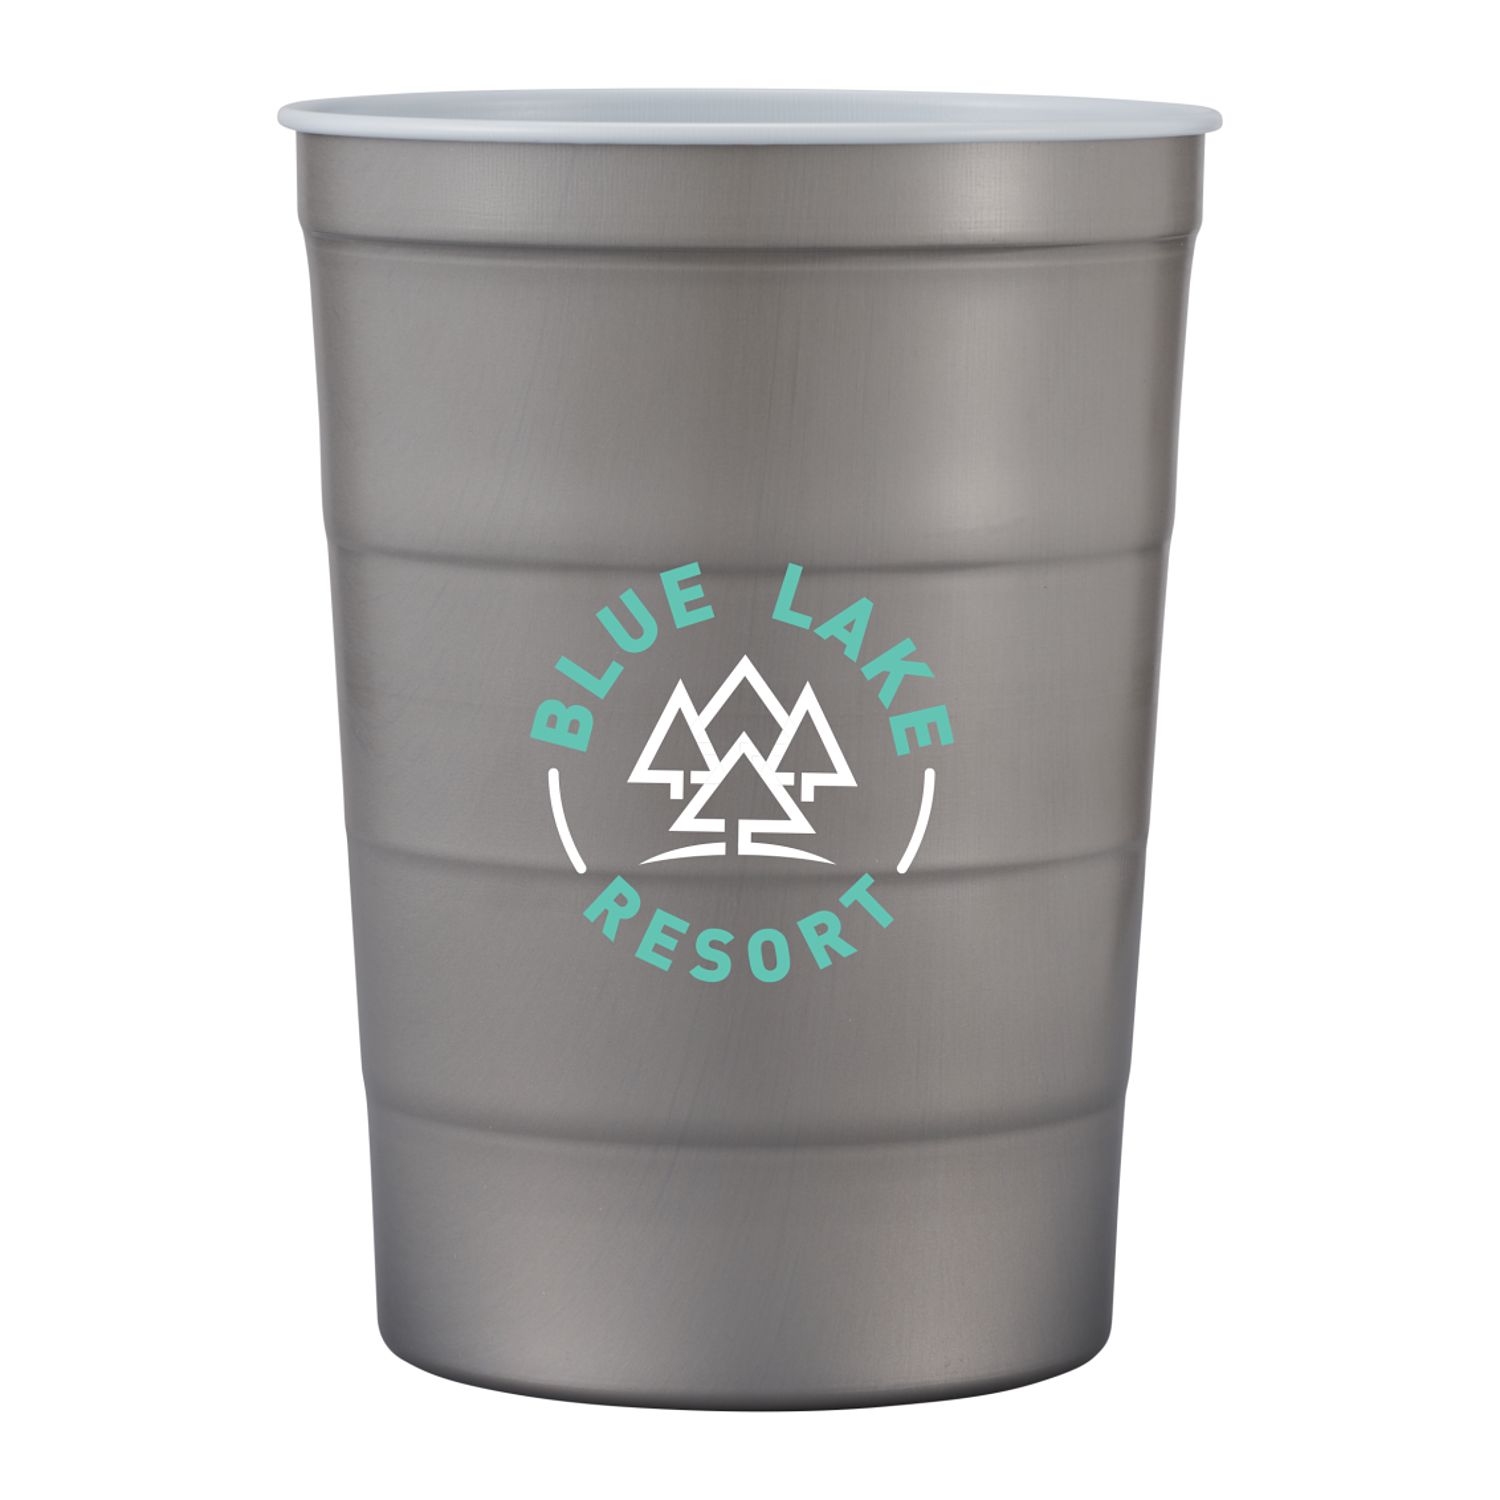 Custom Branded Recyclable Steel Chill-Cups™ 16oz - Gray